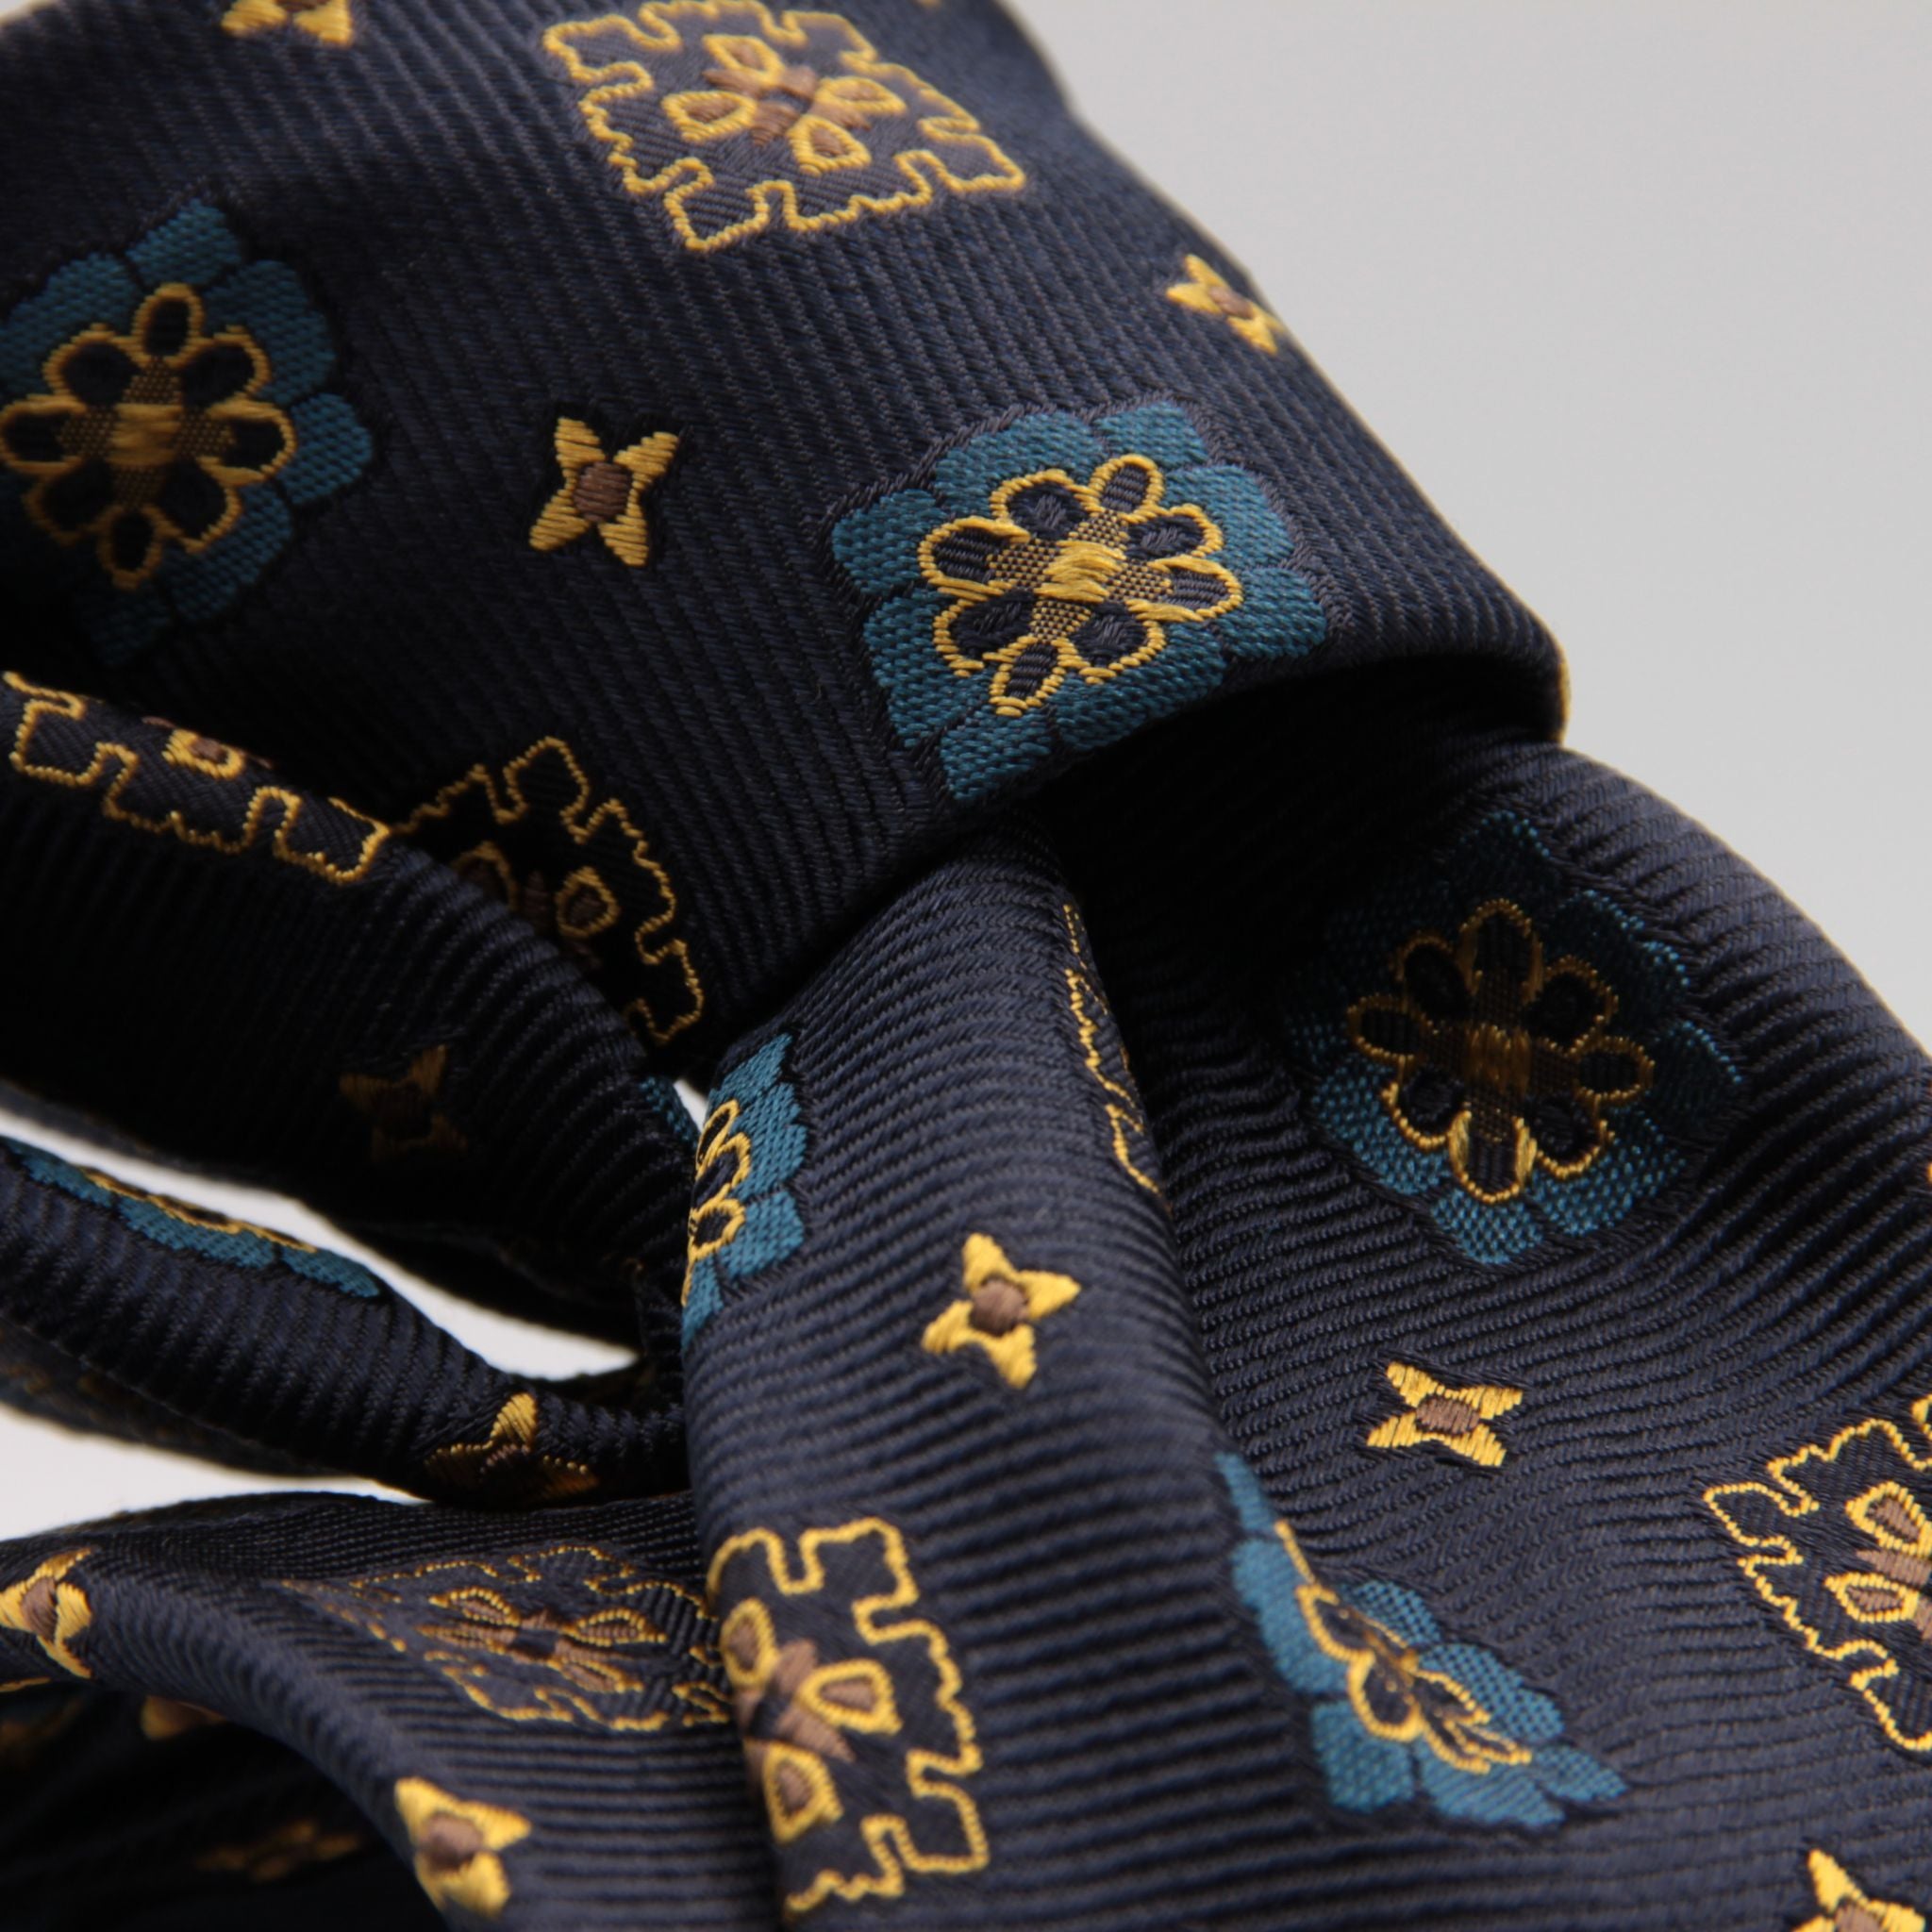 Cruciani & Bella 100% Silk Jacquard  Tipped Blue, Gold, Turquoise and Brown Medallions Tie Handmade in Italy 8 cm x 150 cm #5907